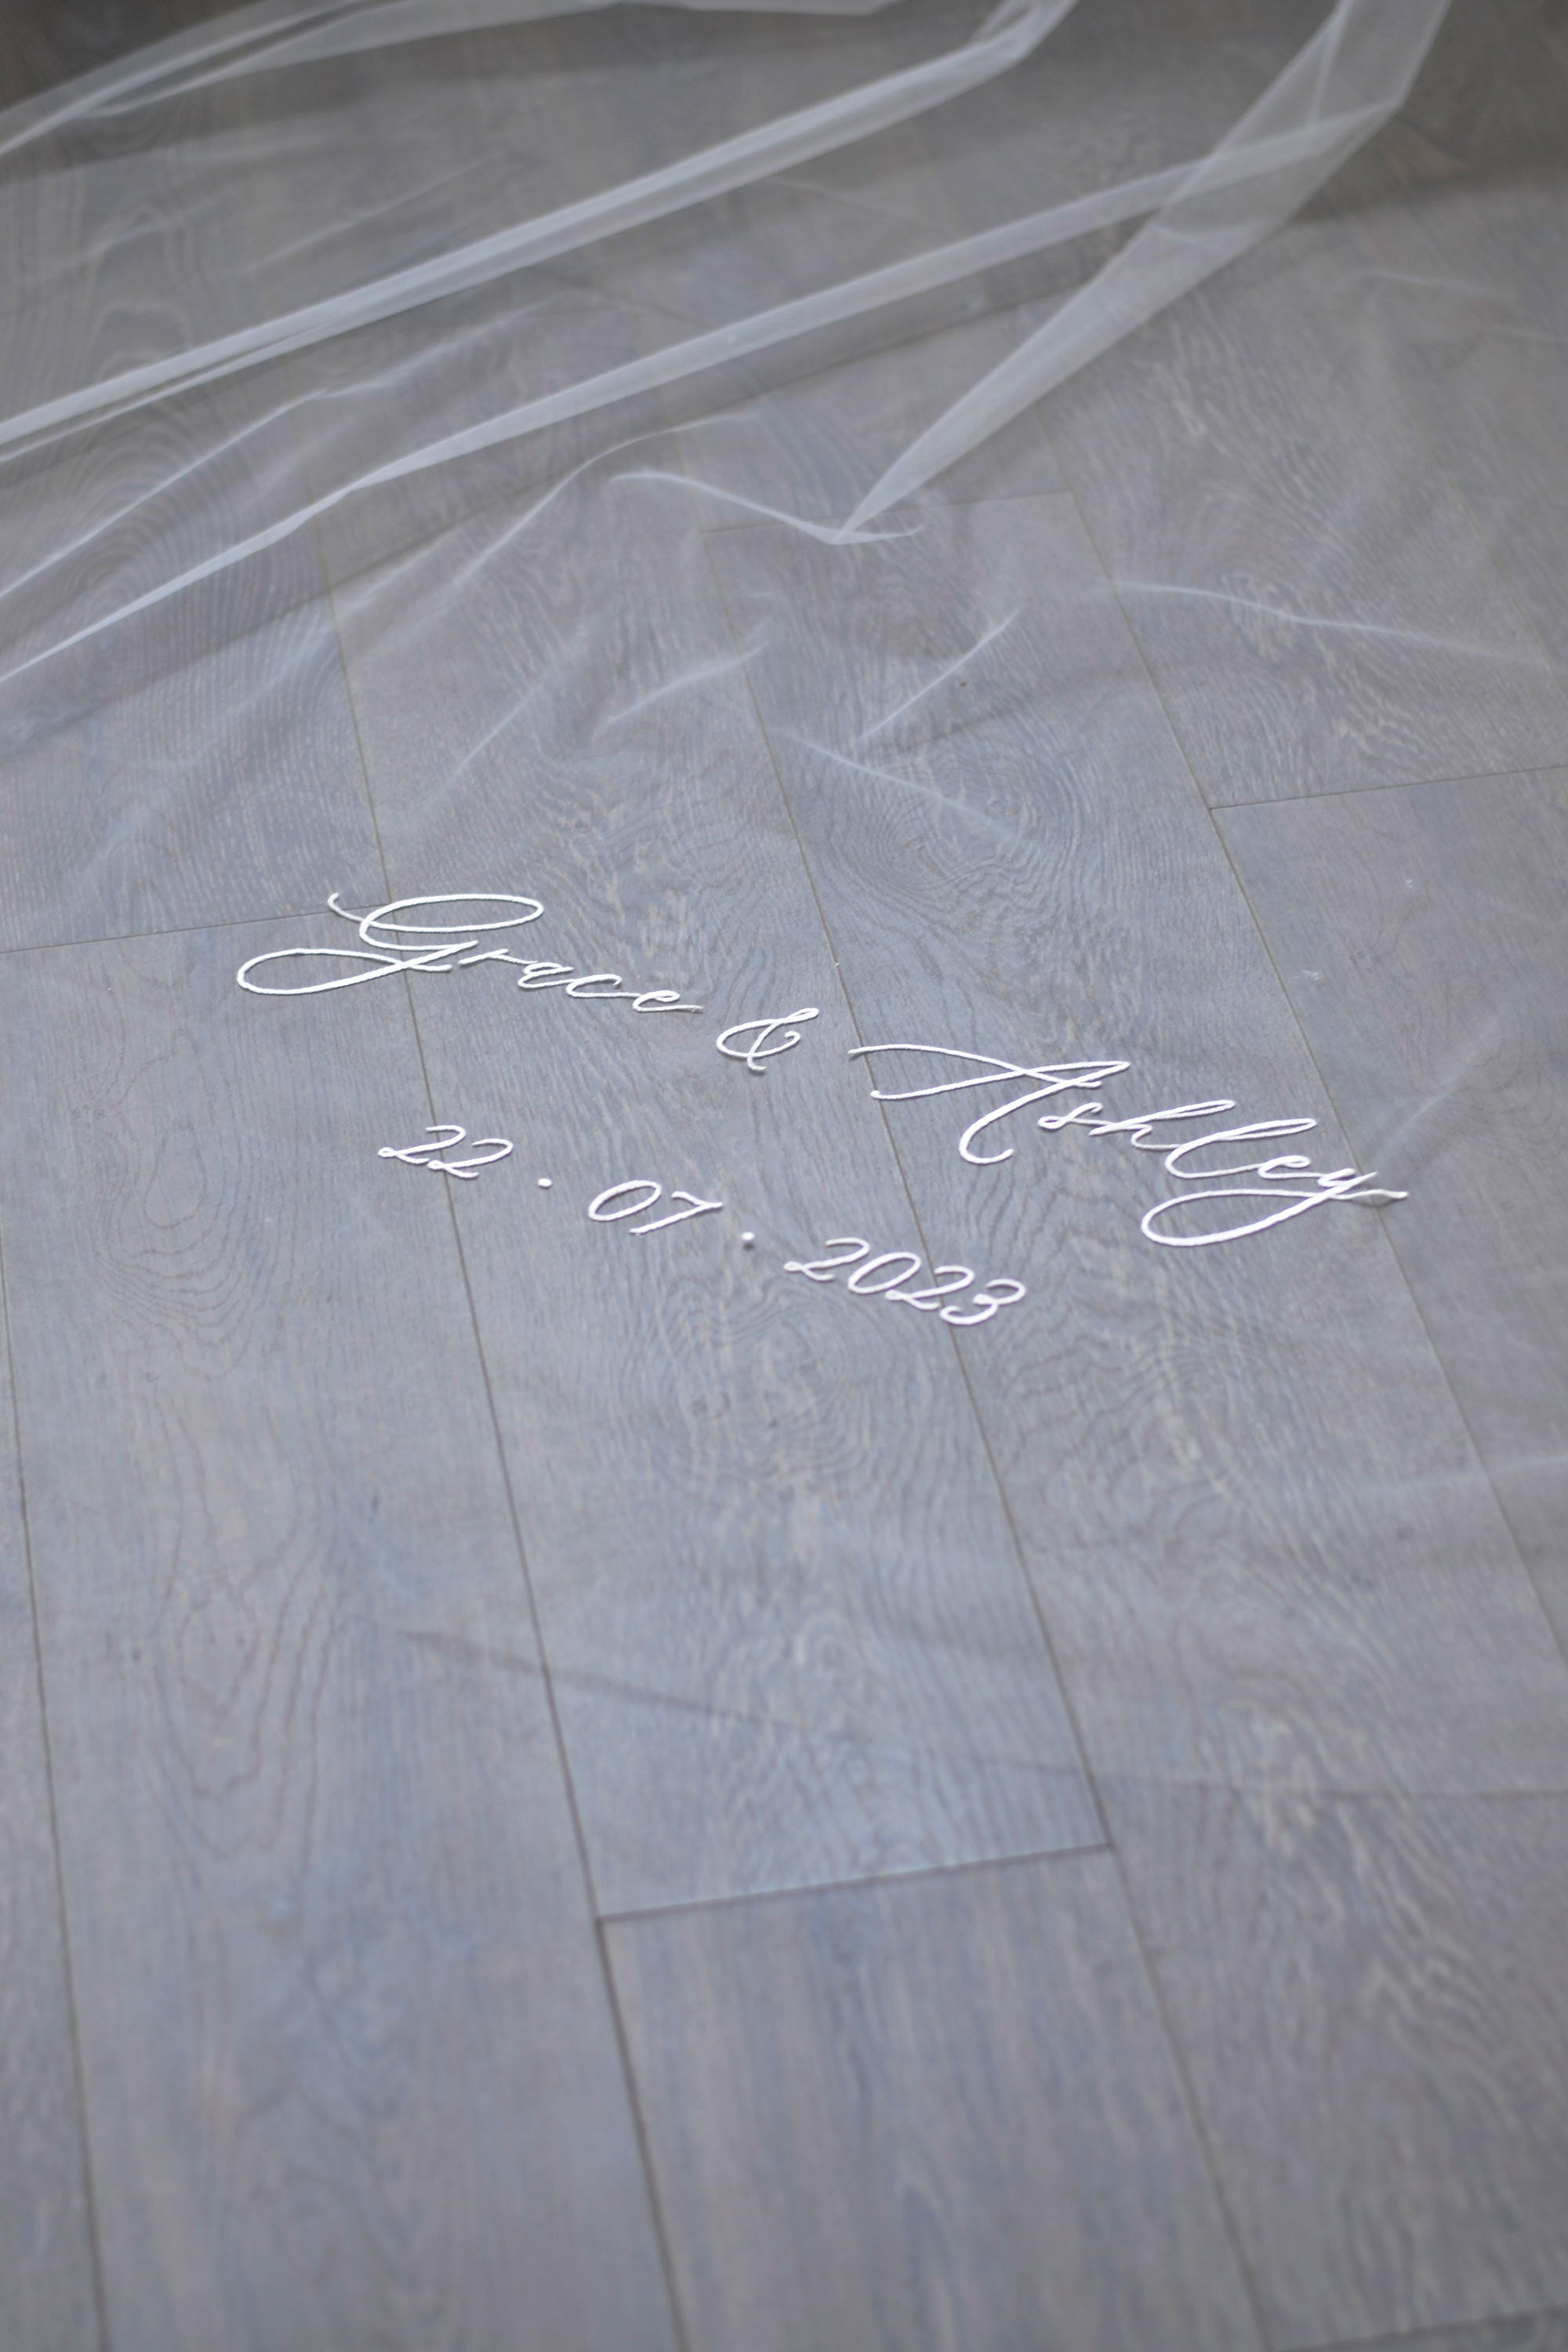 A wedding with veil personalisation embroidery bride and groom's names and wedding date